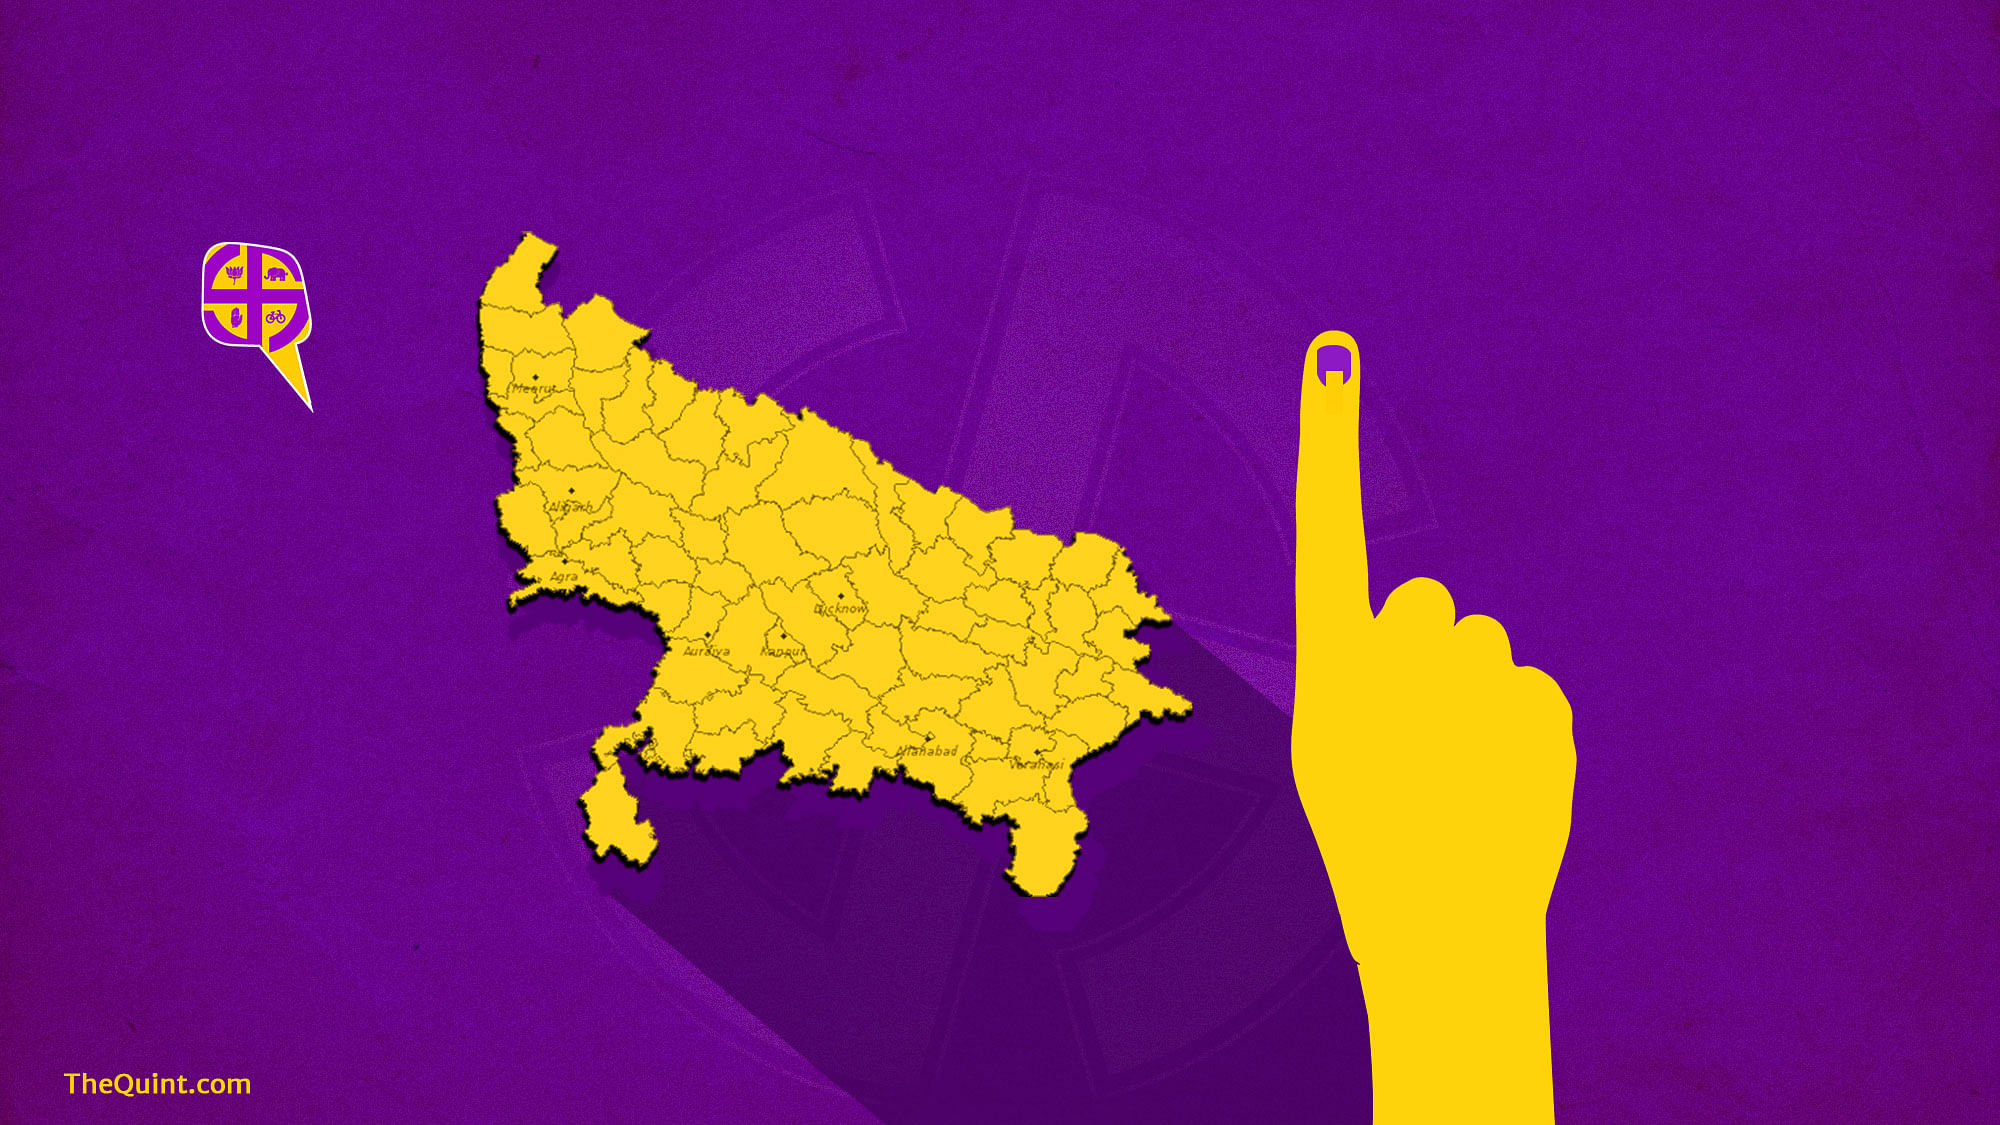 Around 17,926 polling booths have been set up for voting in the sixth phase of elections. (Photo: <b>The Quint</b>)